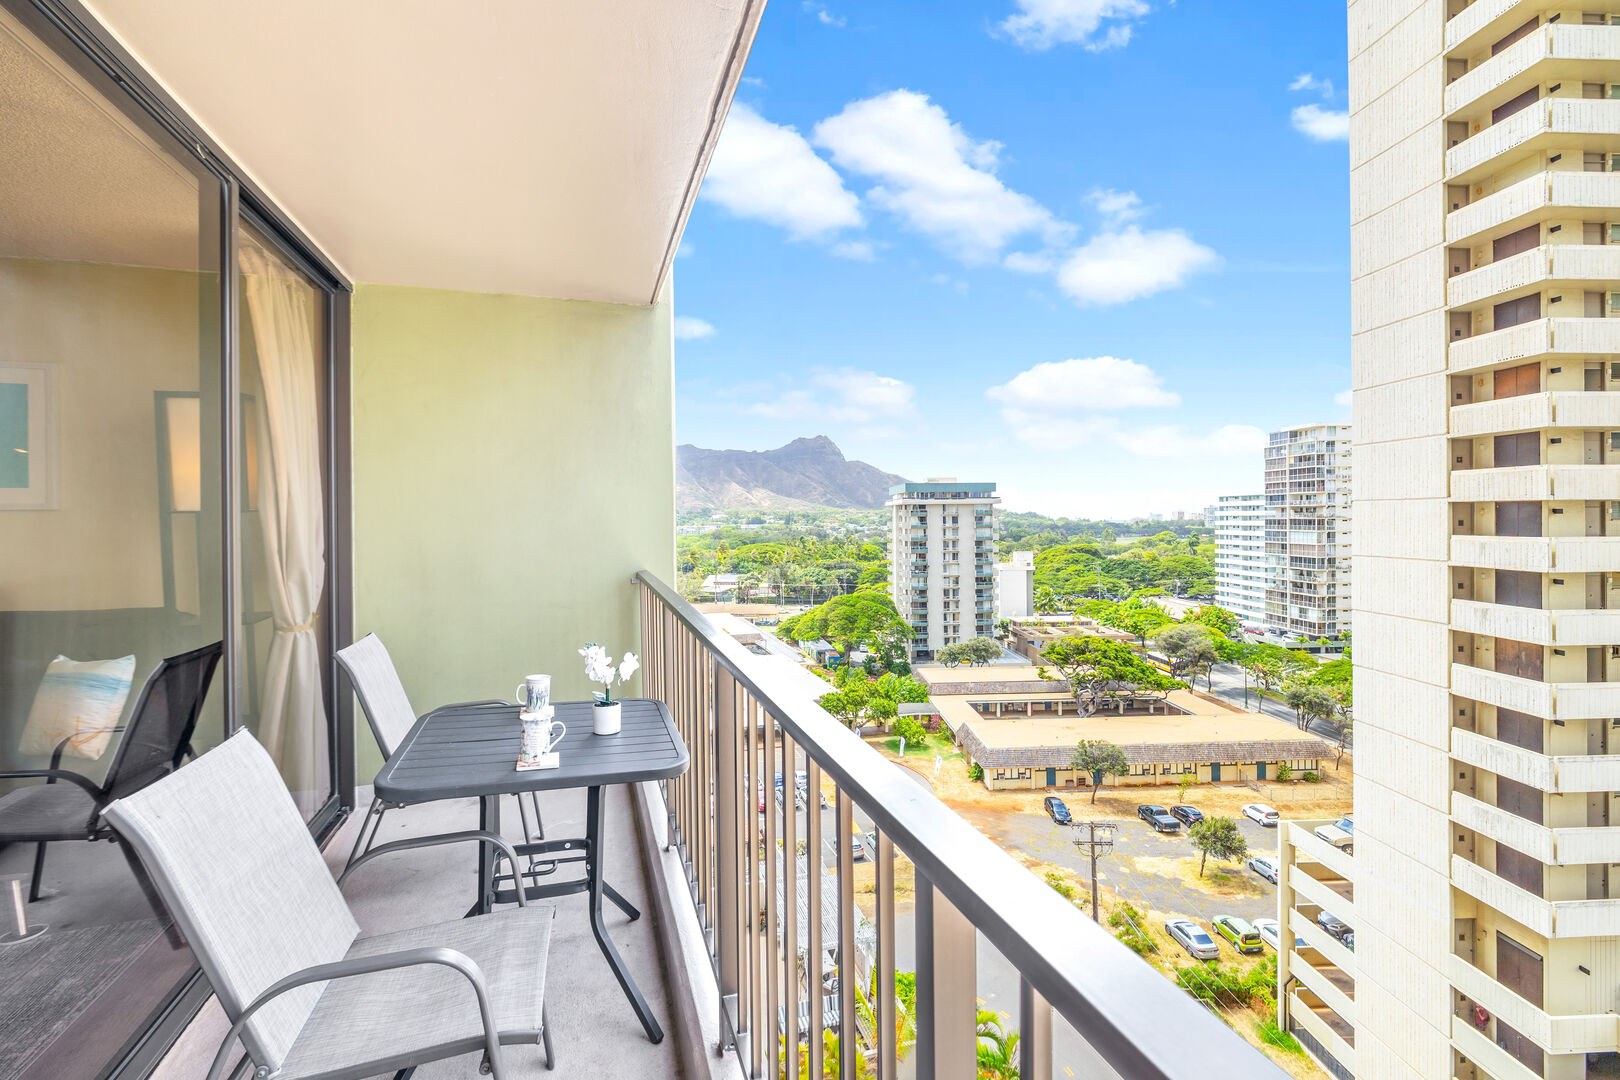 Enjoy the stunning view of the Diamond head mountain and city on your own private lanai!